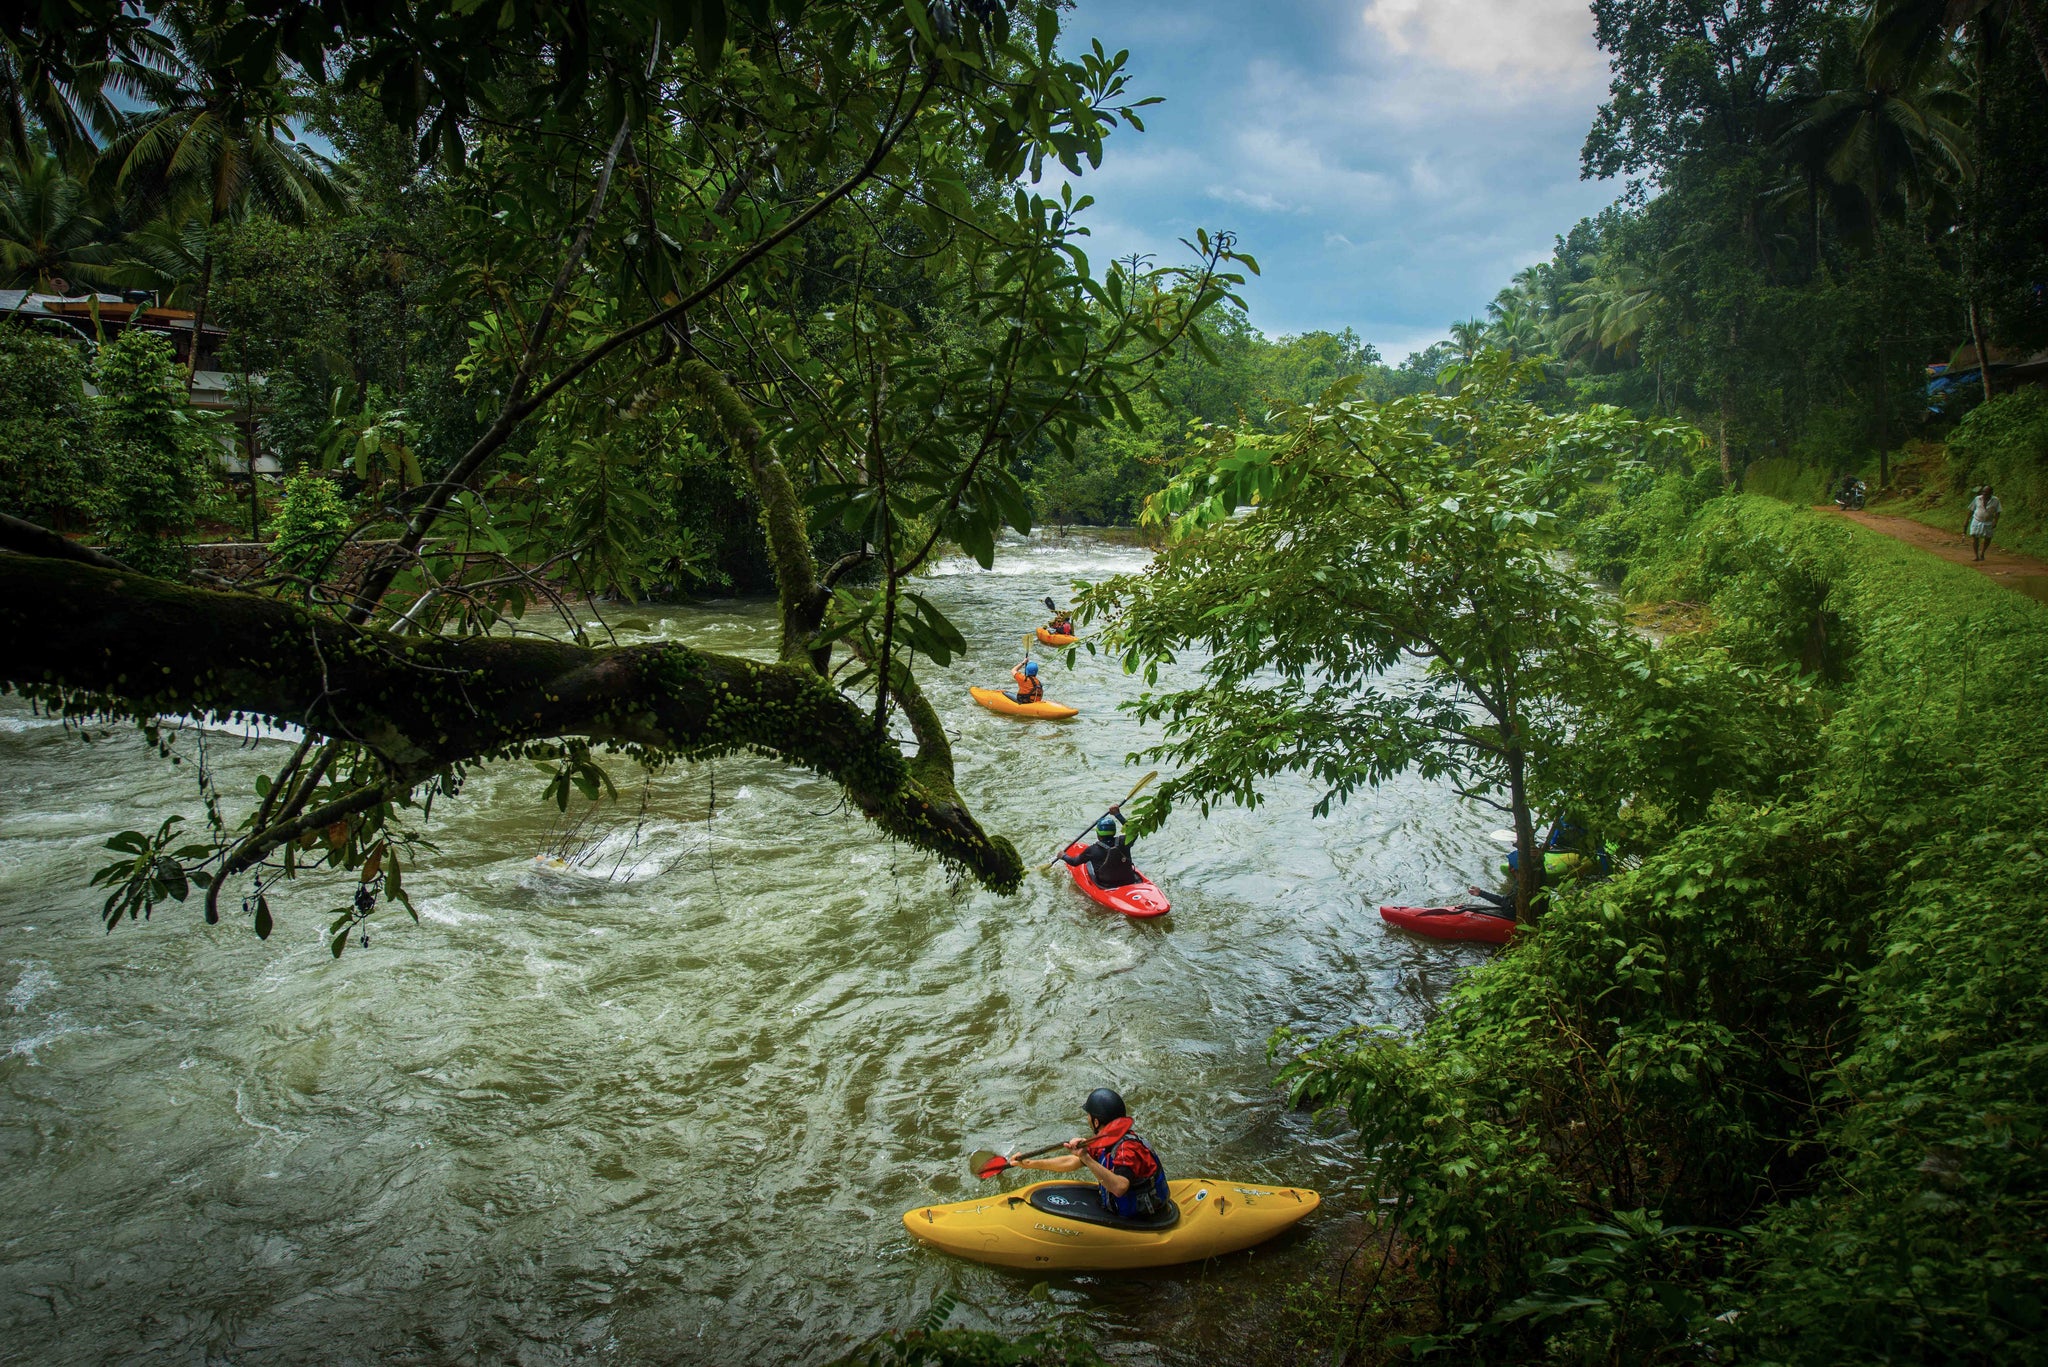 Learn to whitewater kayak, buy kayaks and SUPs in India.